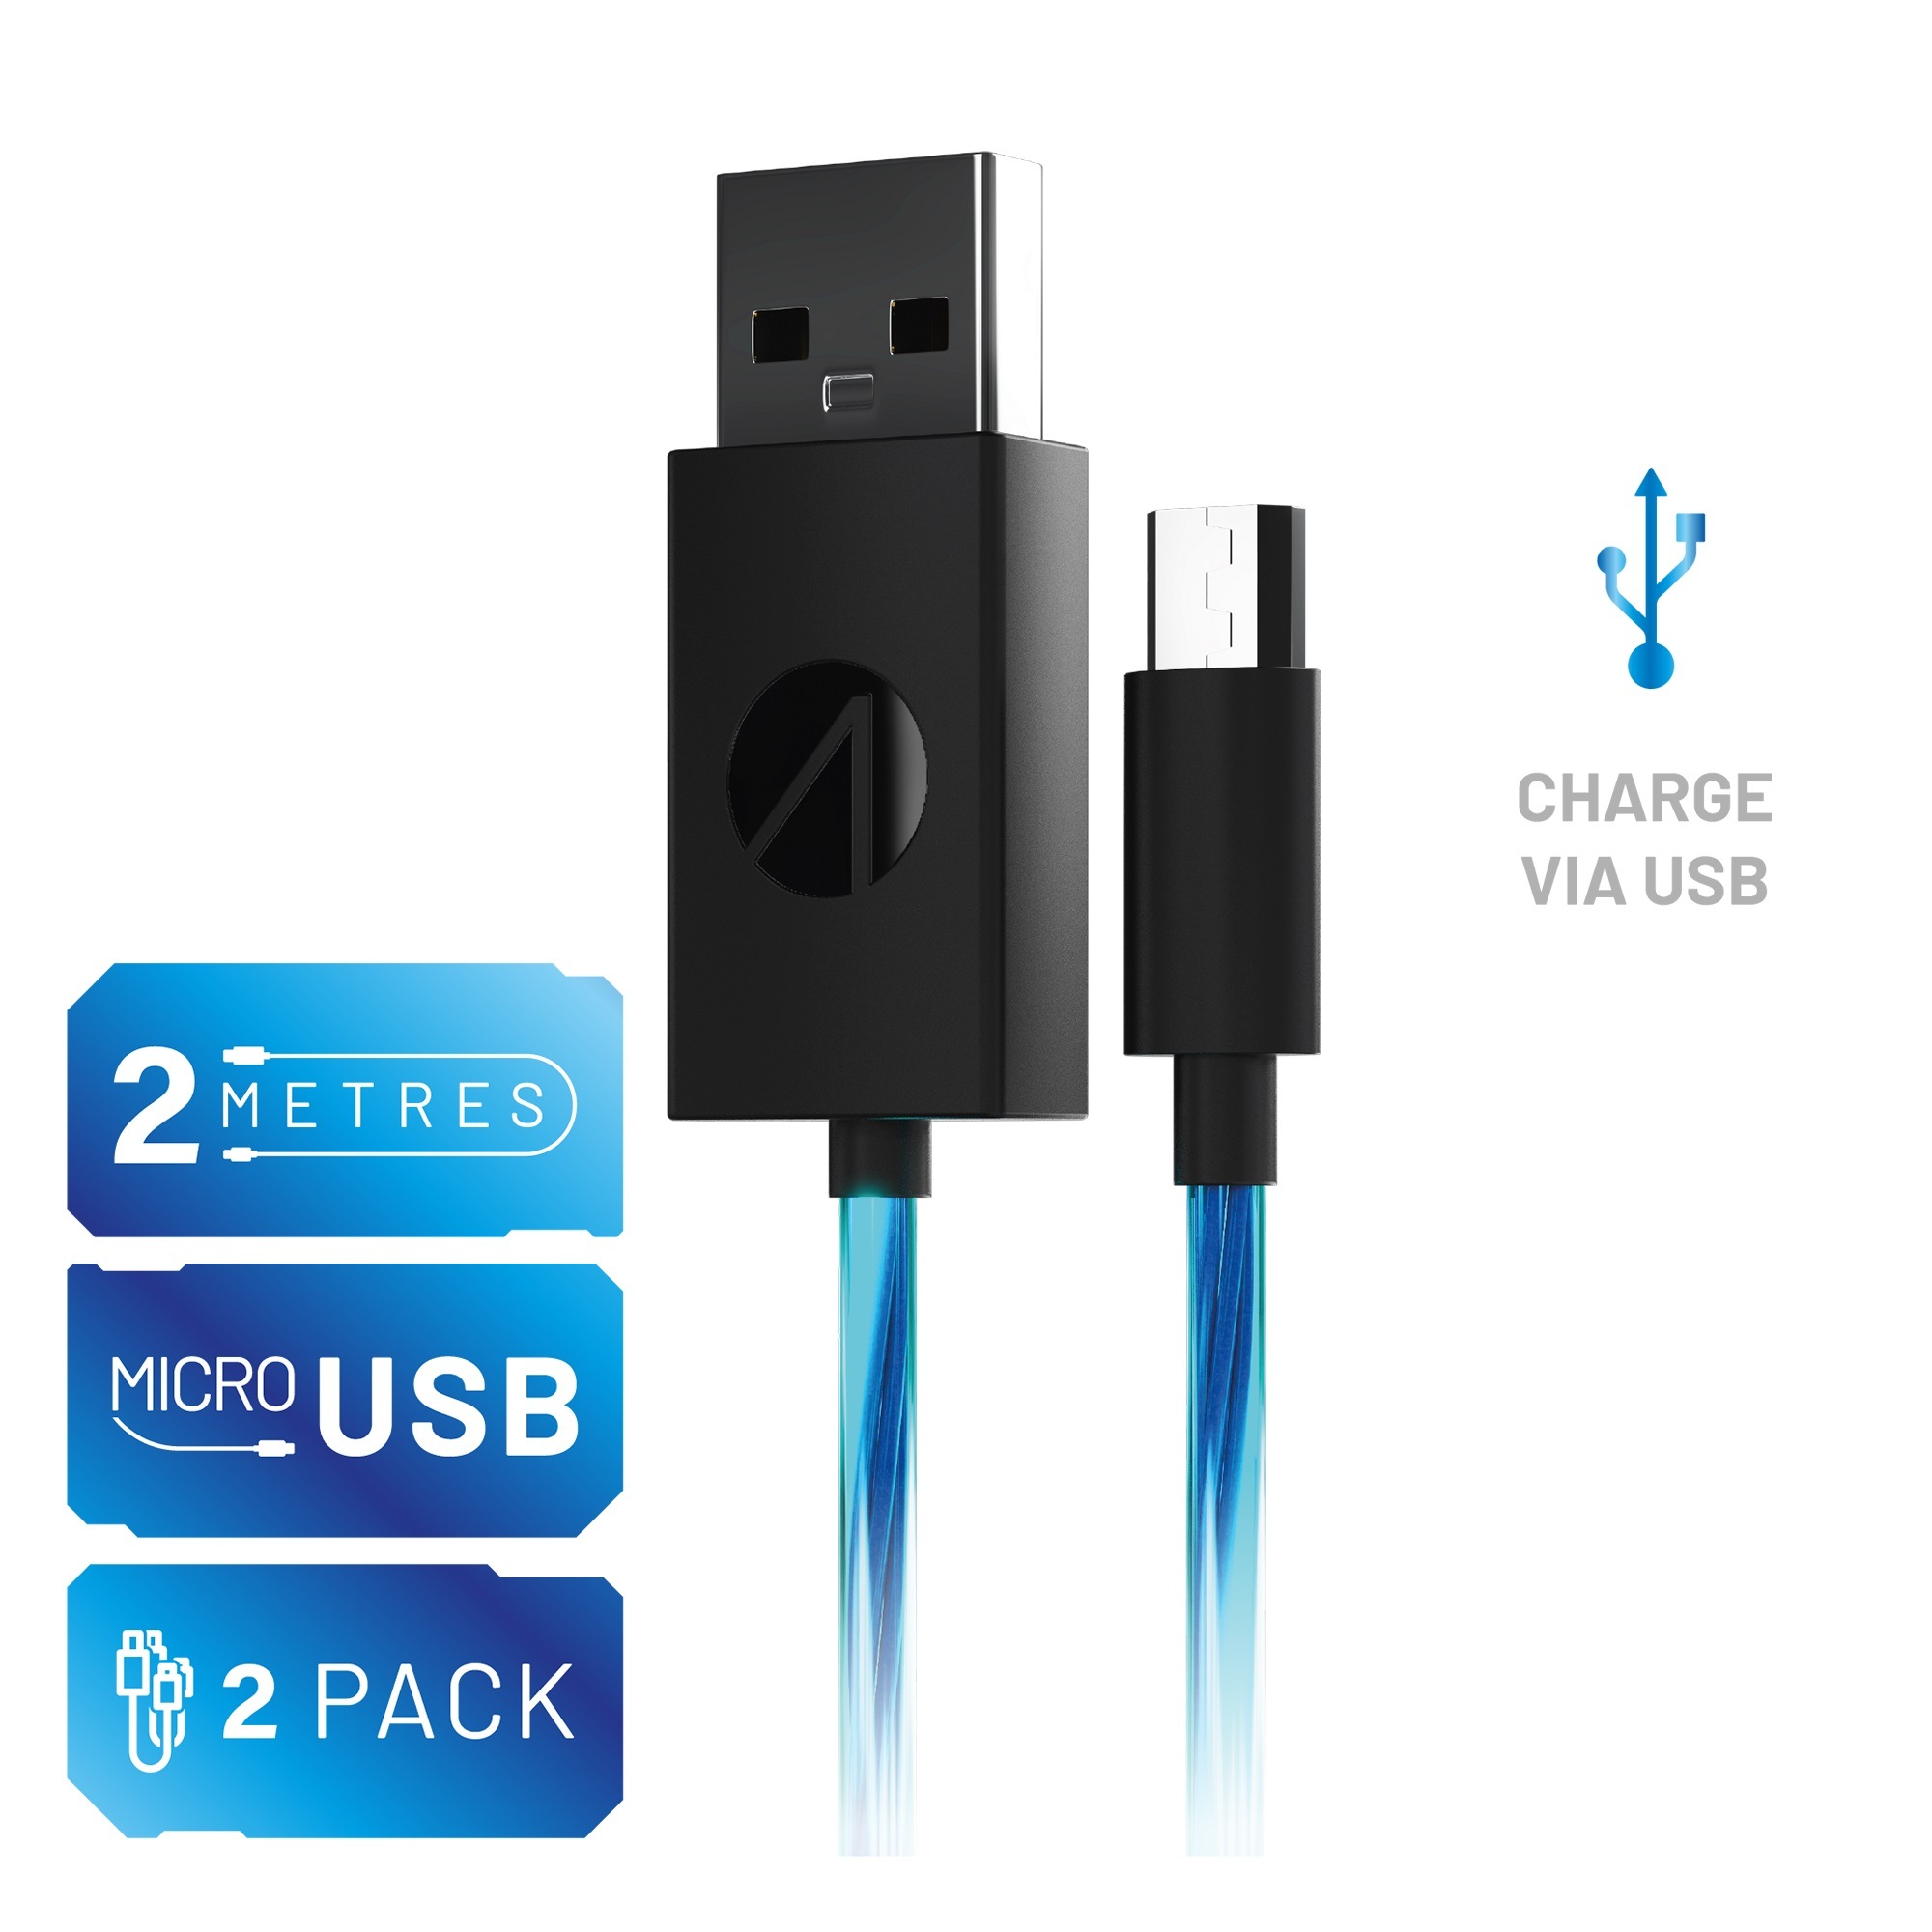 Stealth USB-Kabel »USB Kabel Doppelpack (2x 2m) Play&Charge mit LED Beleuchtung«, Micro-USB, 200 cm, Beleuchtung